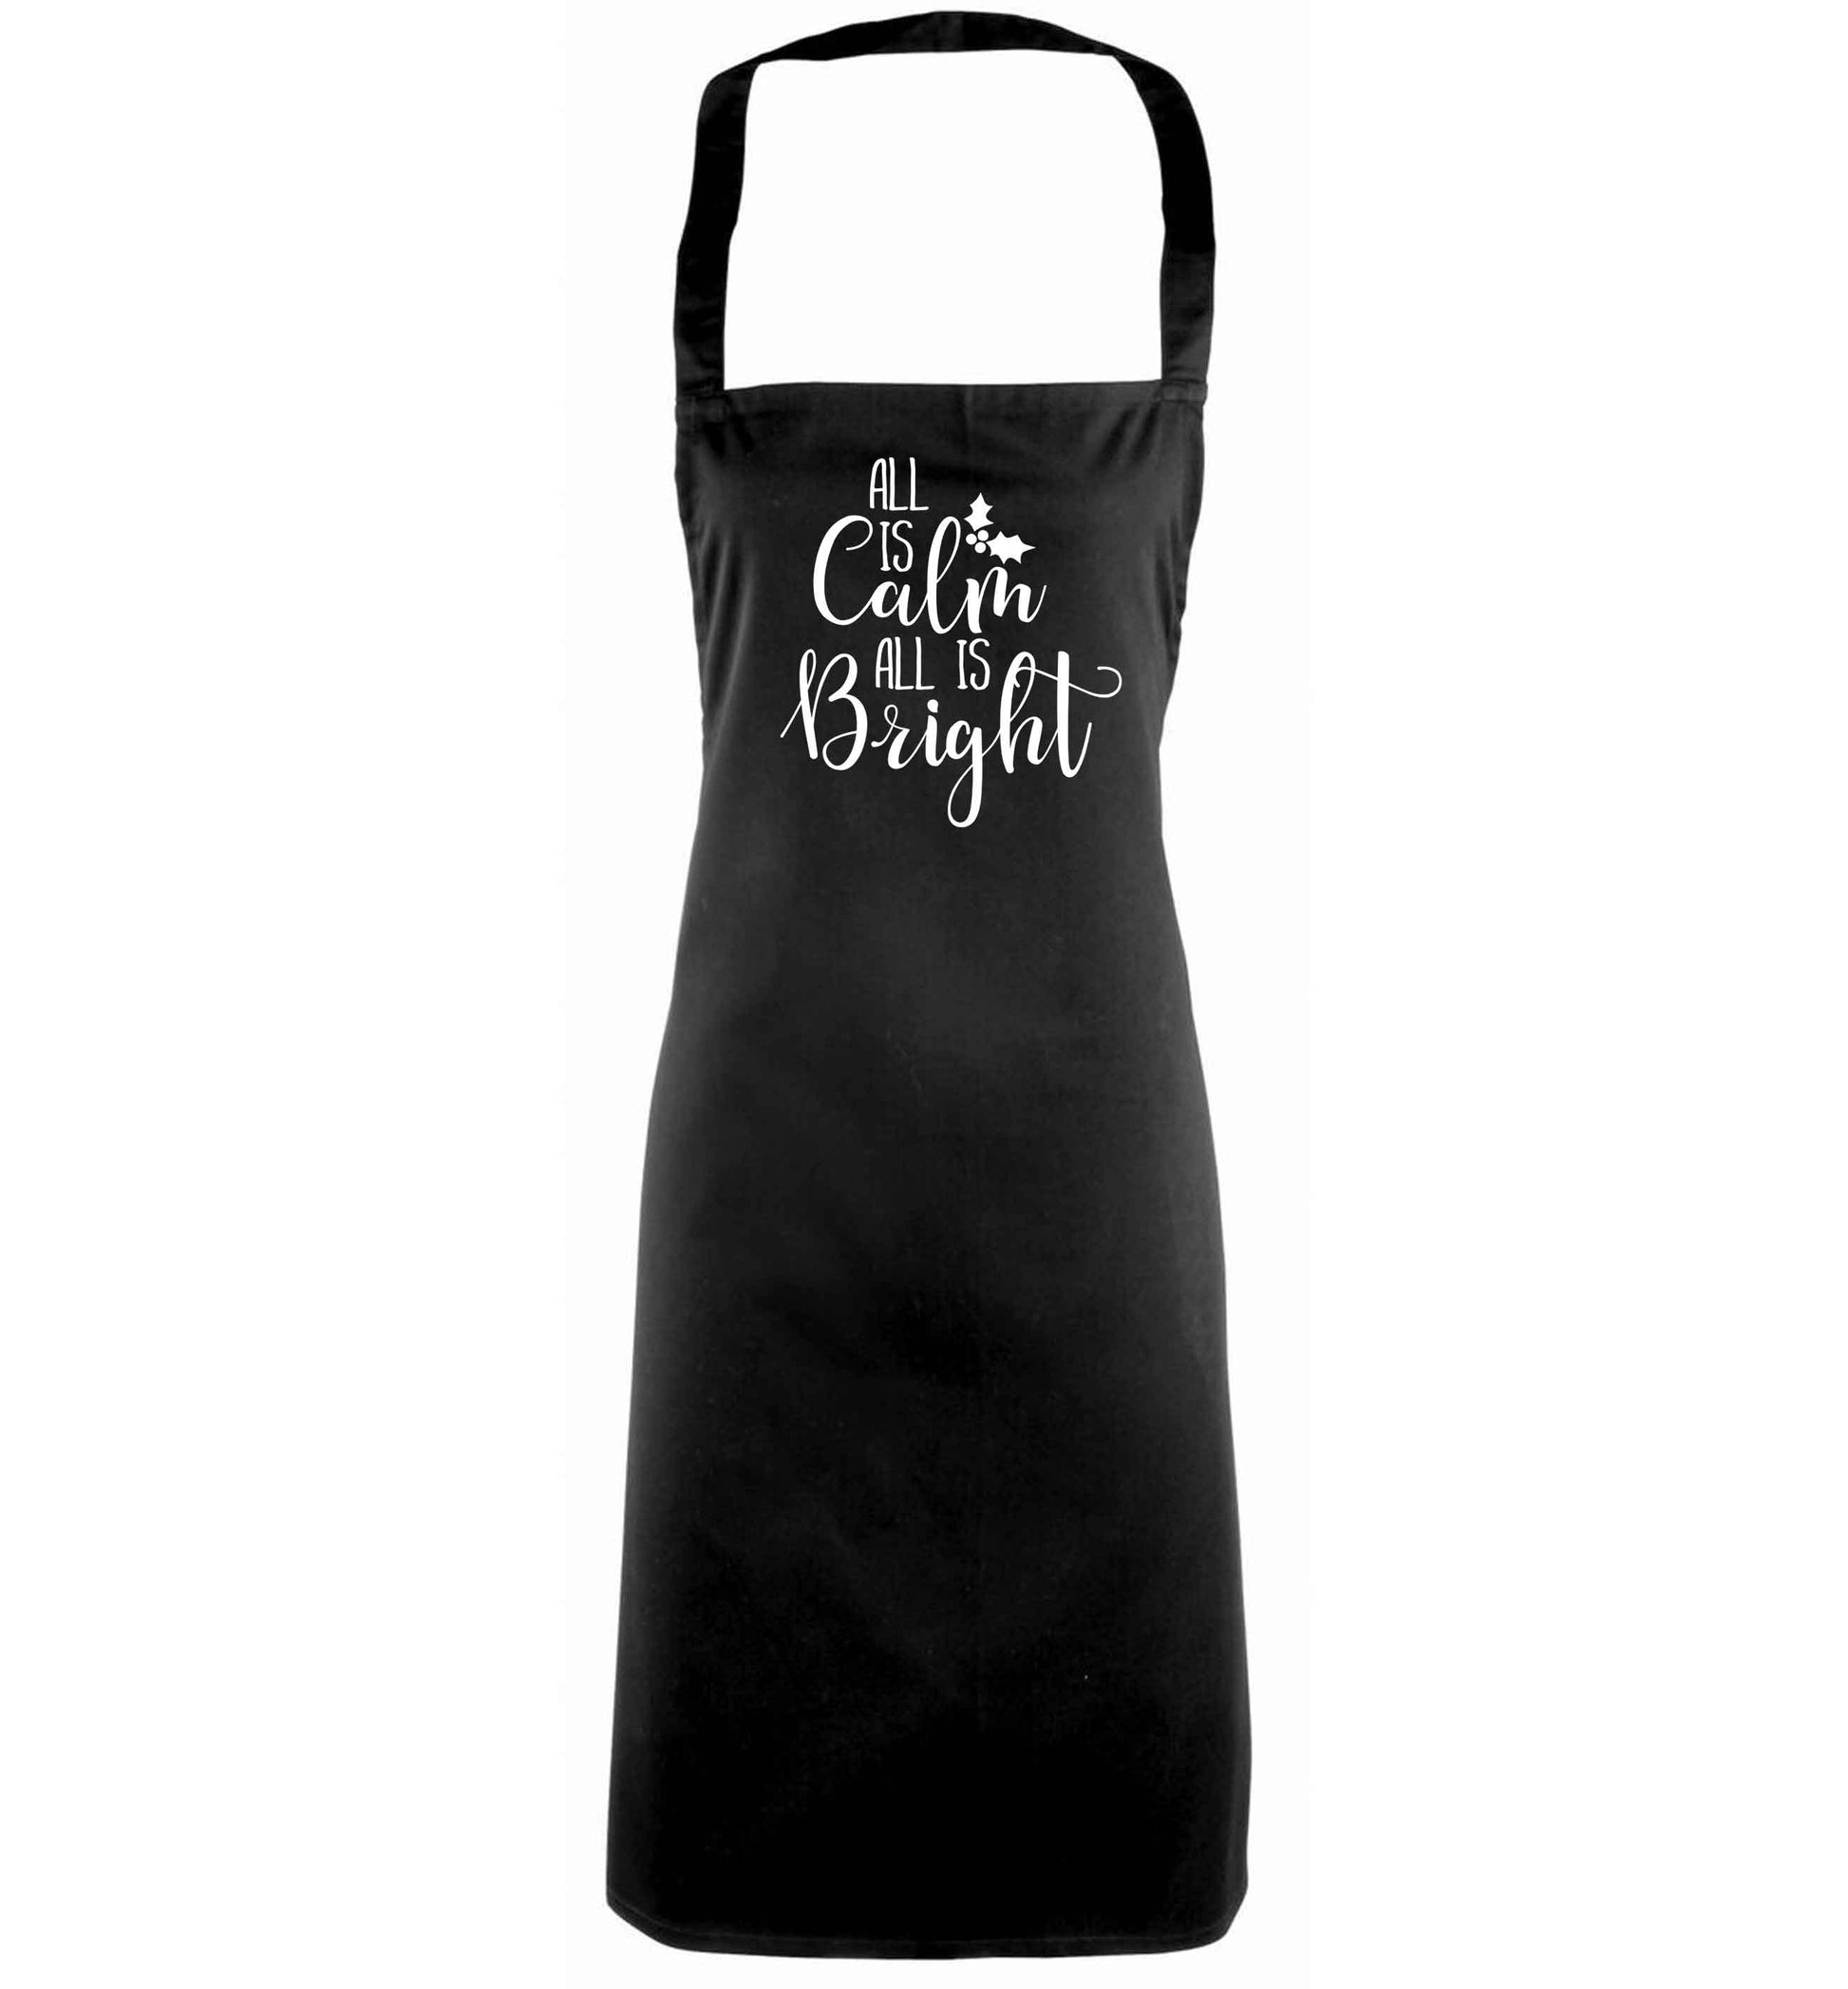 All is calm is bright black apron